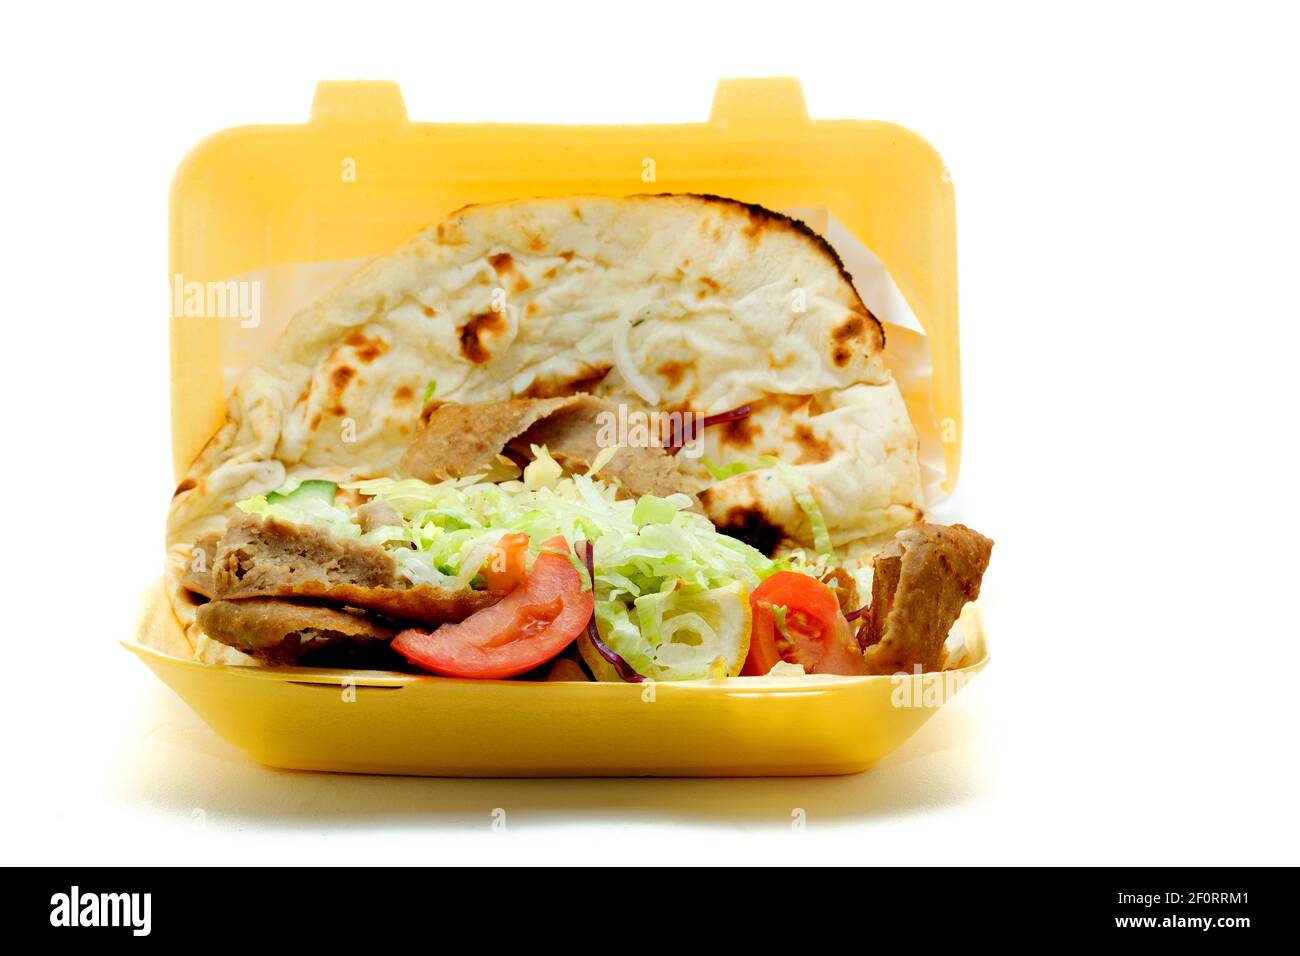 A take away Doner Kebab, or donor kebab, served with salad and wrapped in a Nan bread. The kebab has been sold in a disposable polystyrene container. Stock Photo